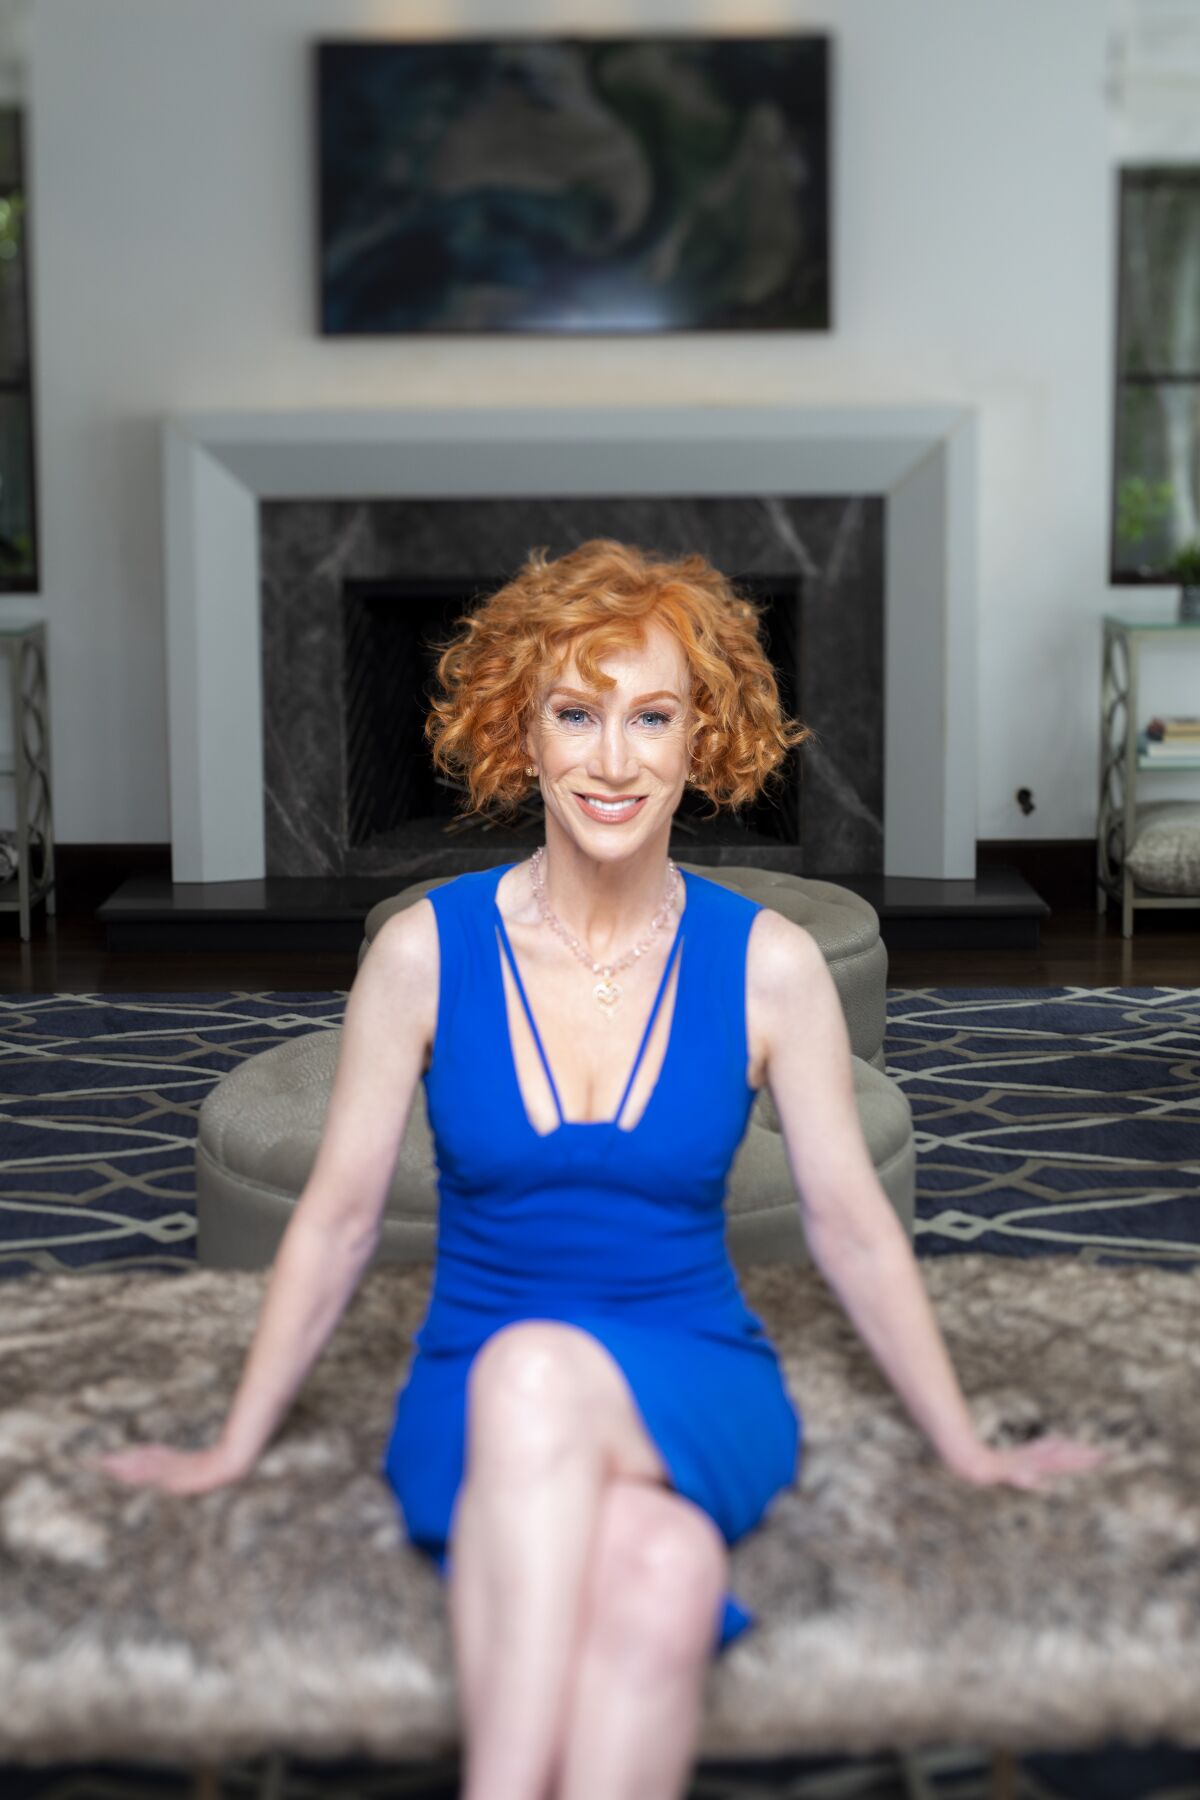 A portrait of Kathy Griffin in a blue dress.